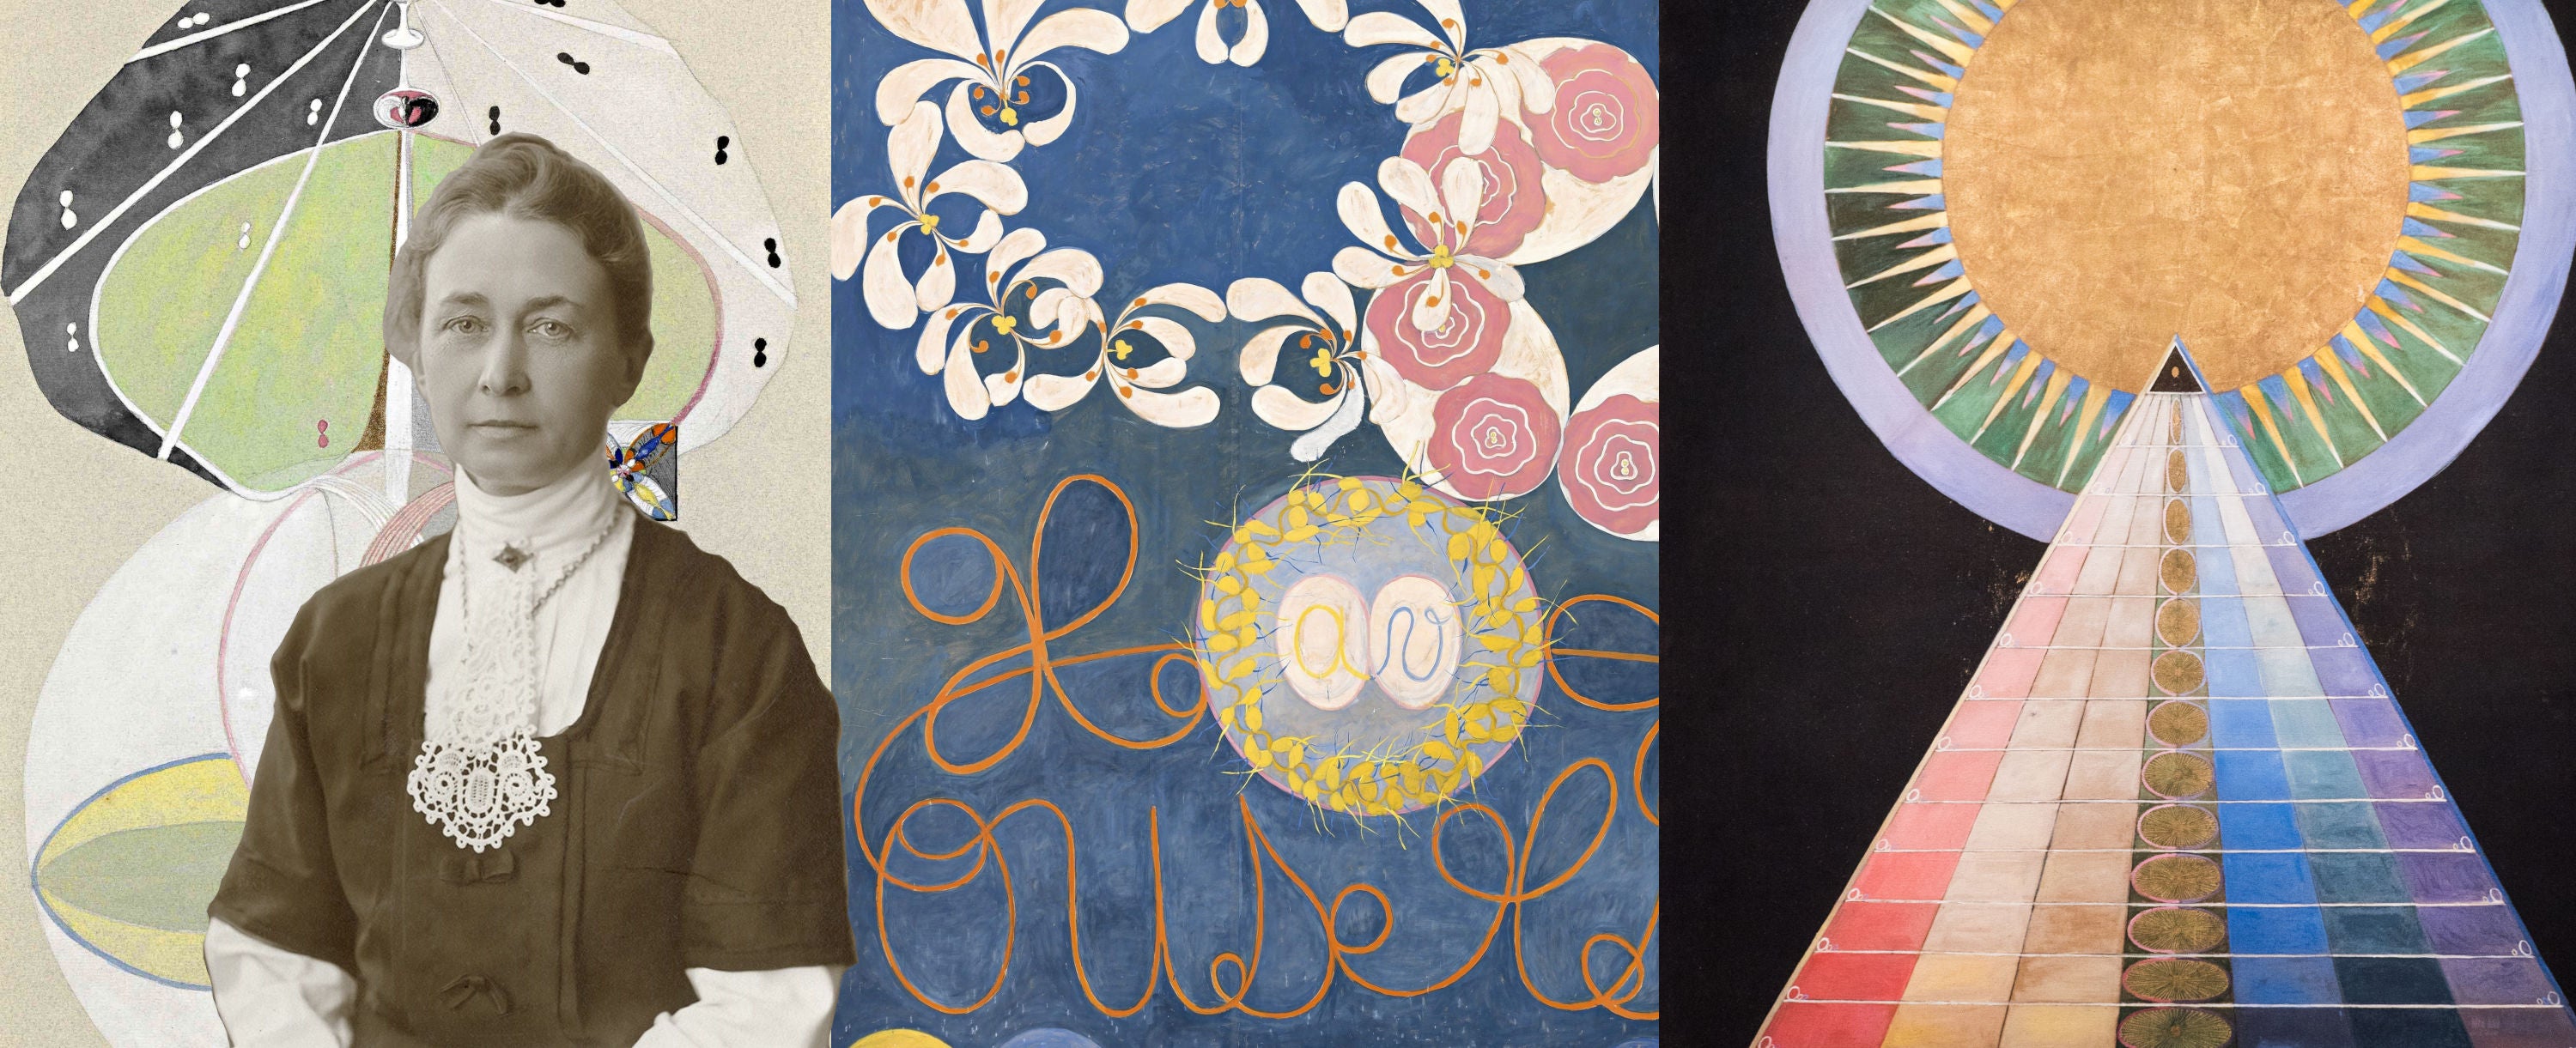 Hilma Af Klint and some of her temple works